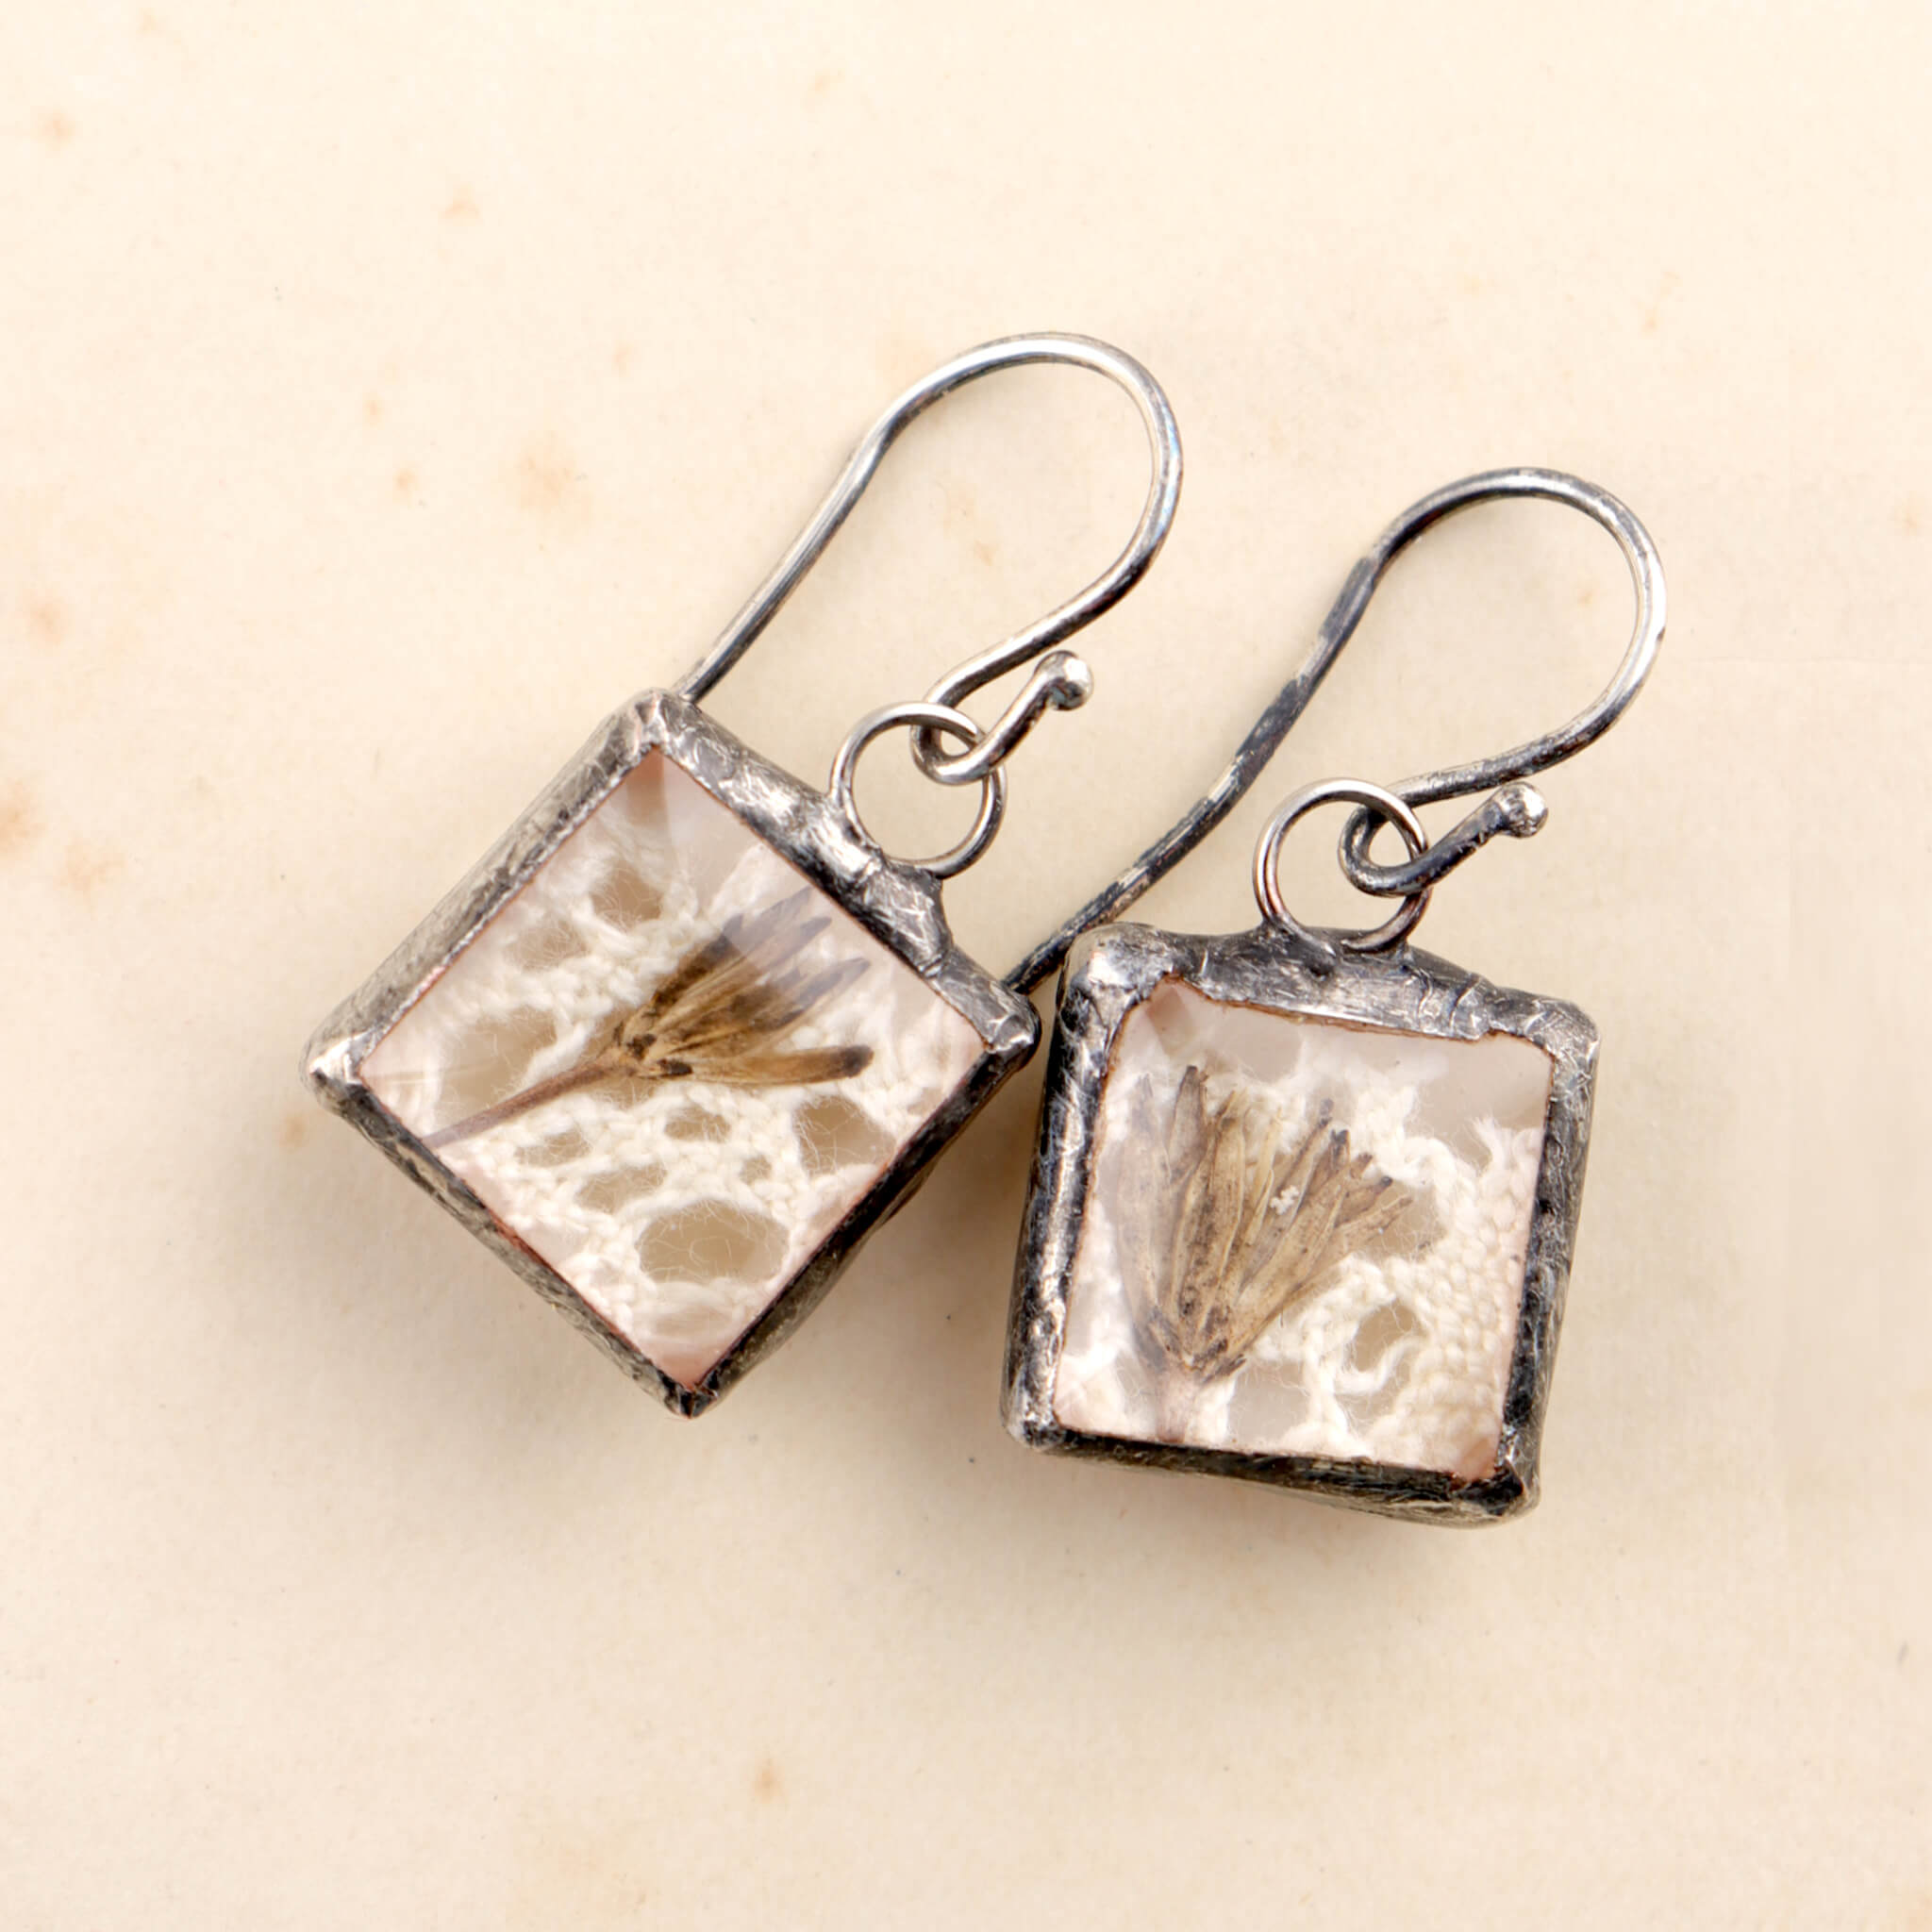 Square soldered earrings with vintage lase and pressed flowers lying on an old letter